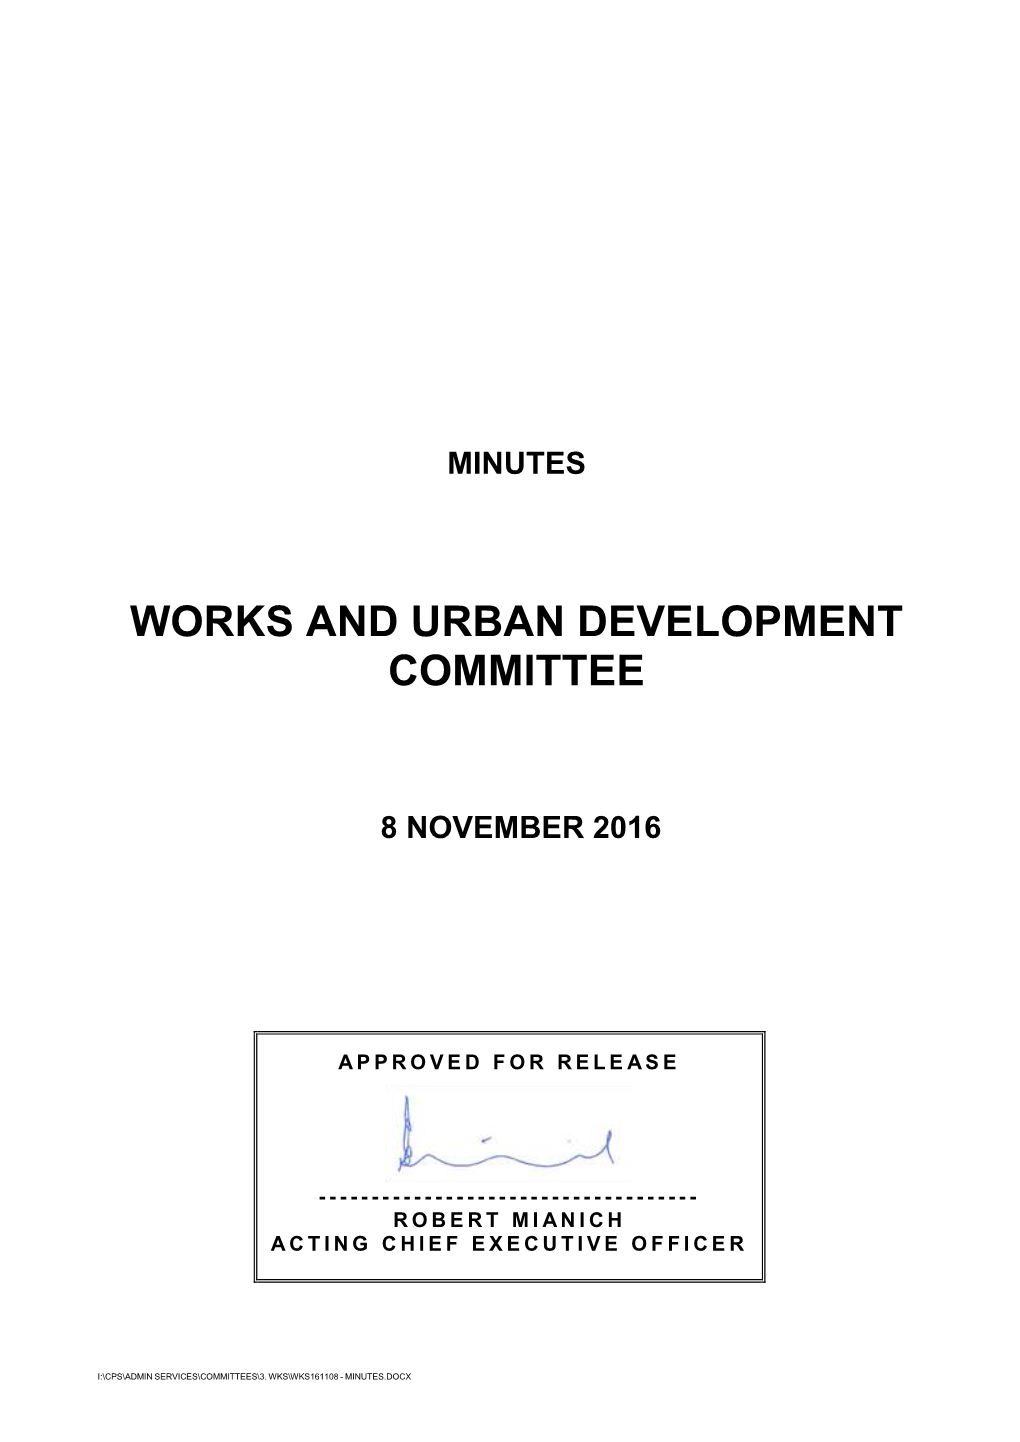 Works and Urban Development Committee